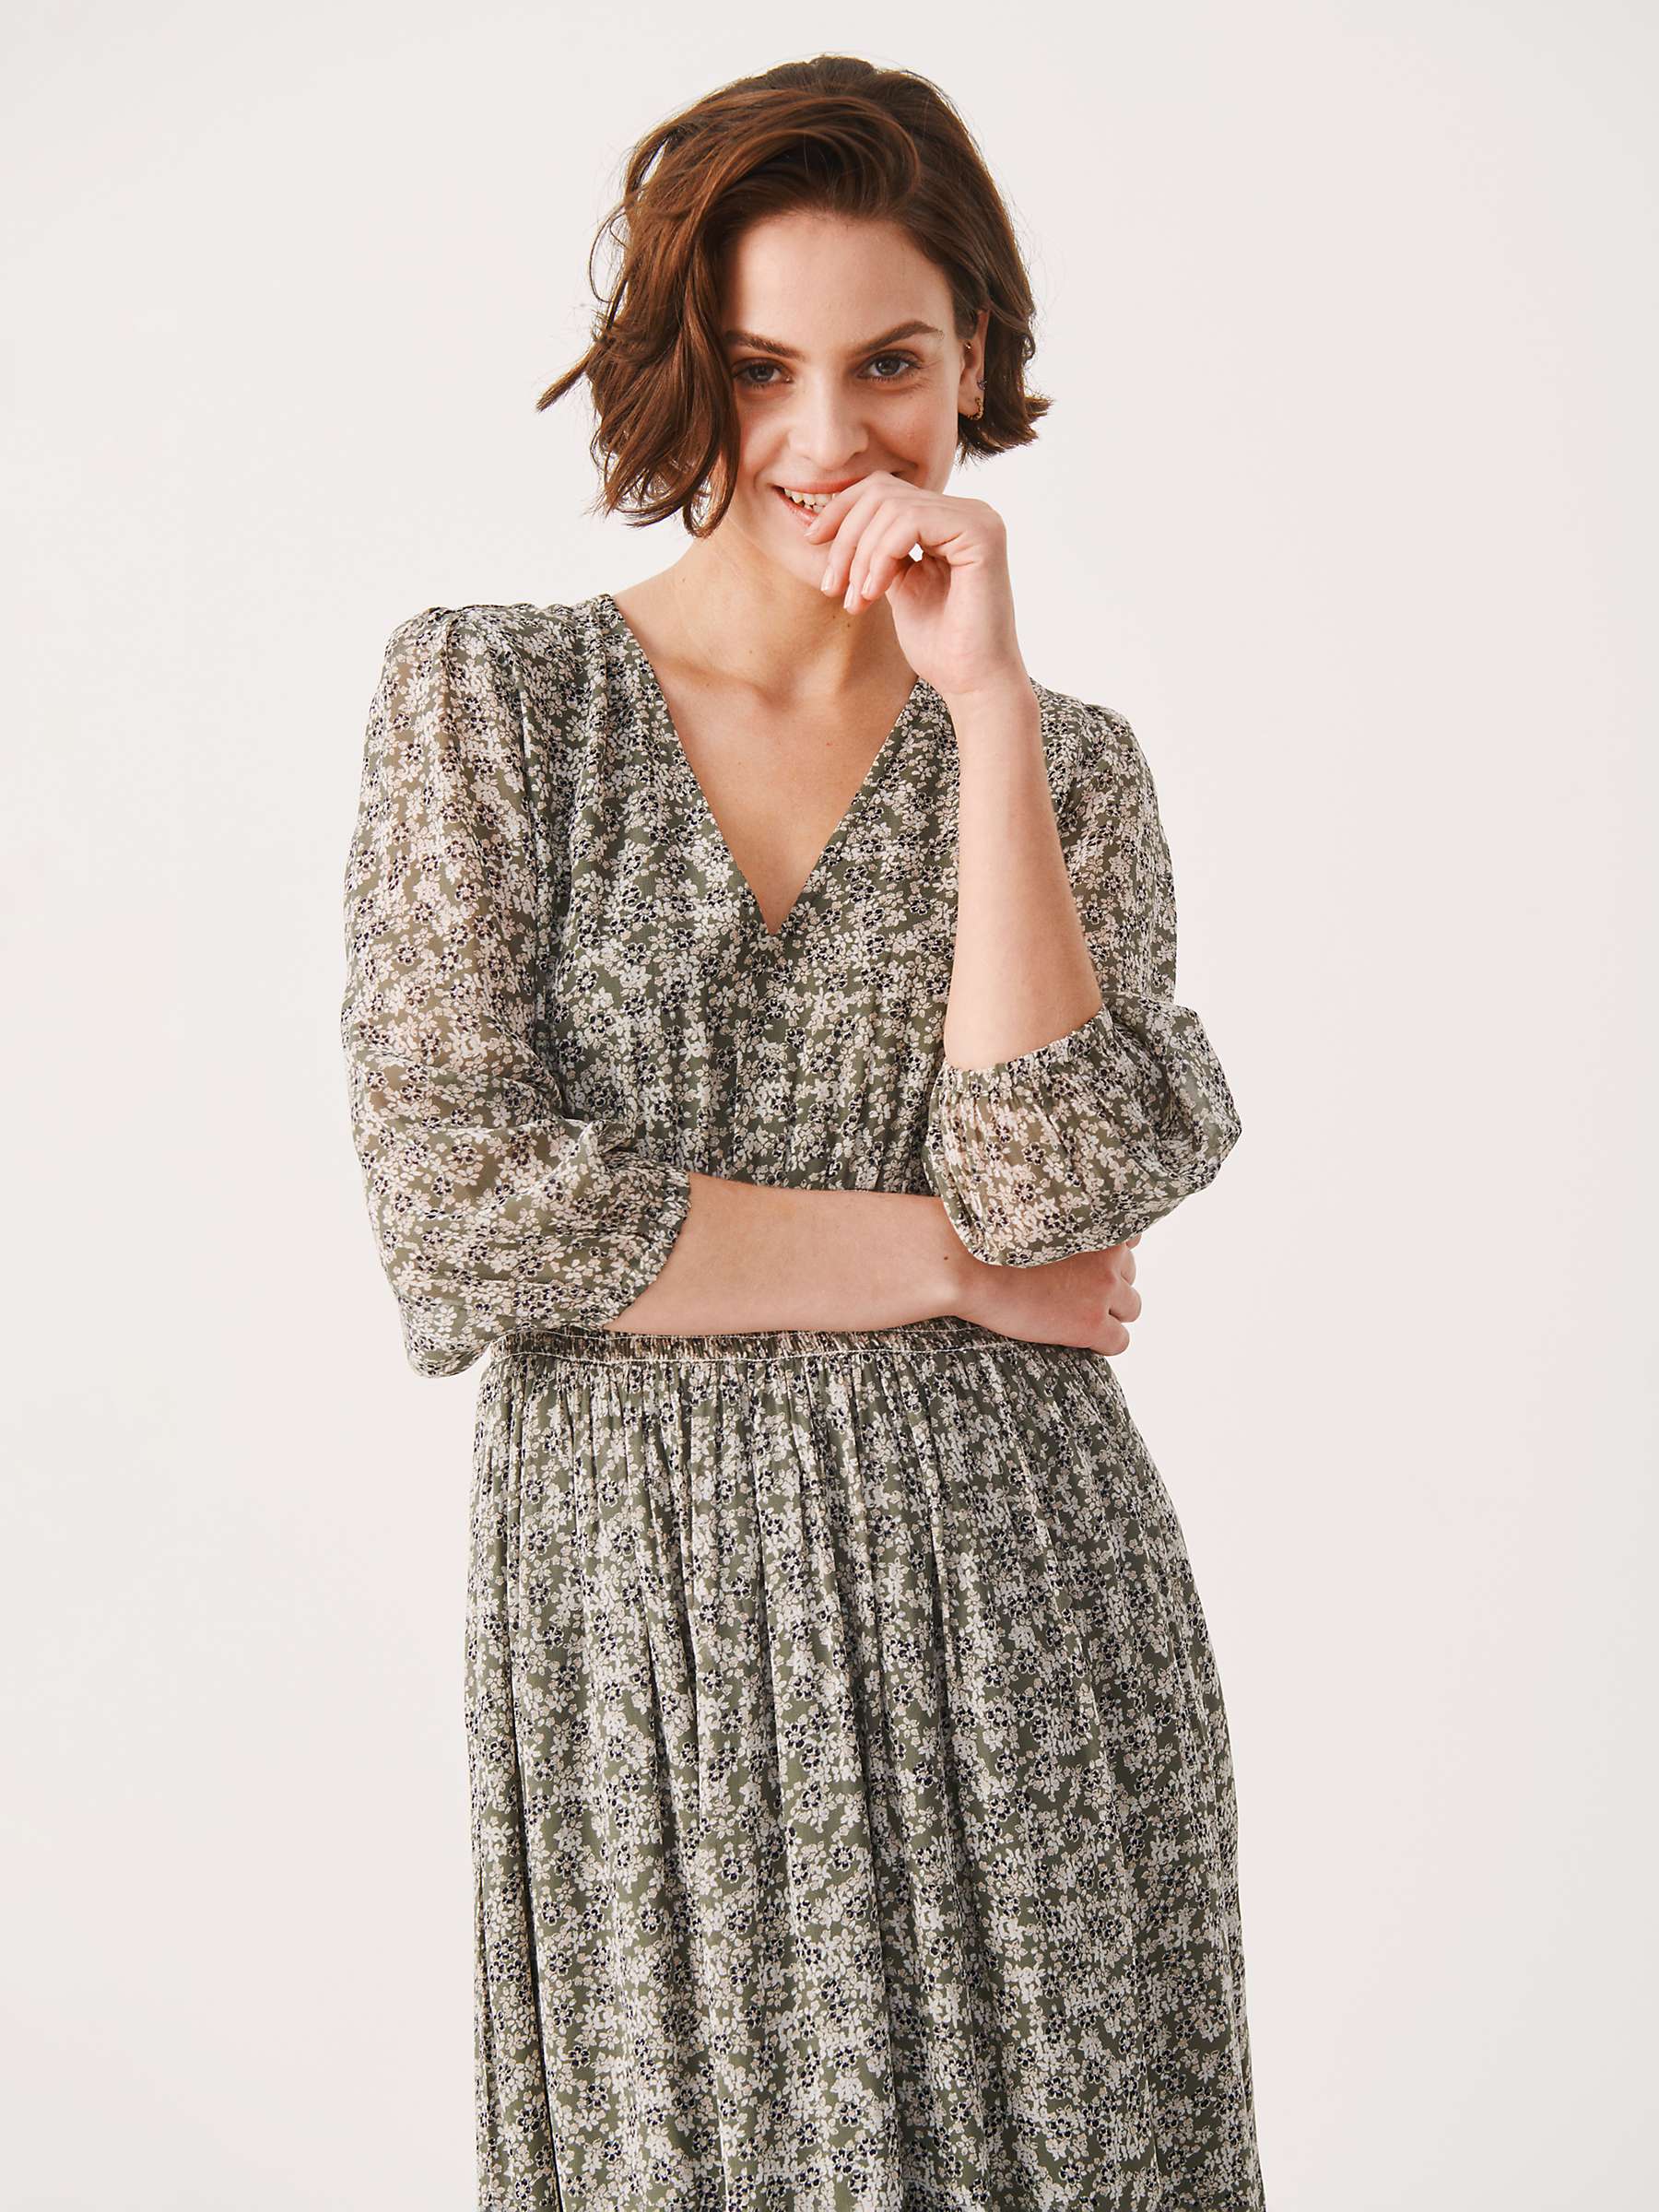 Buy Part Two Siraline Floral Midi Dress Online at johnlewis.com